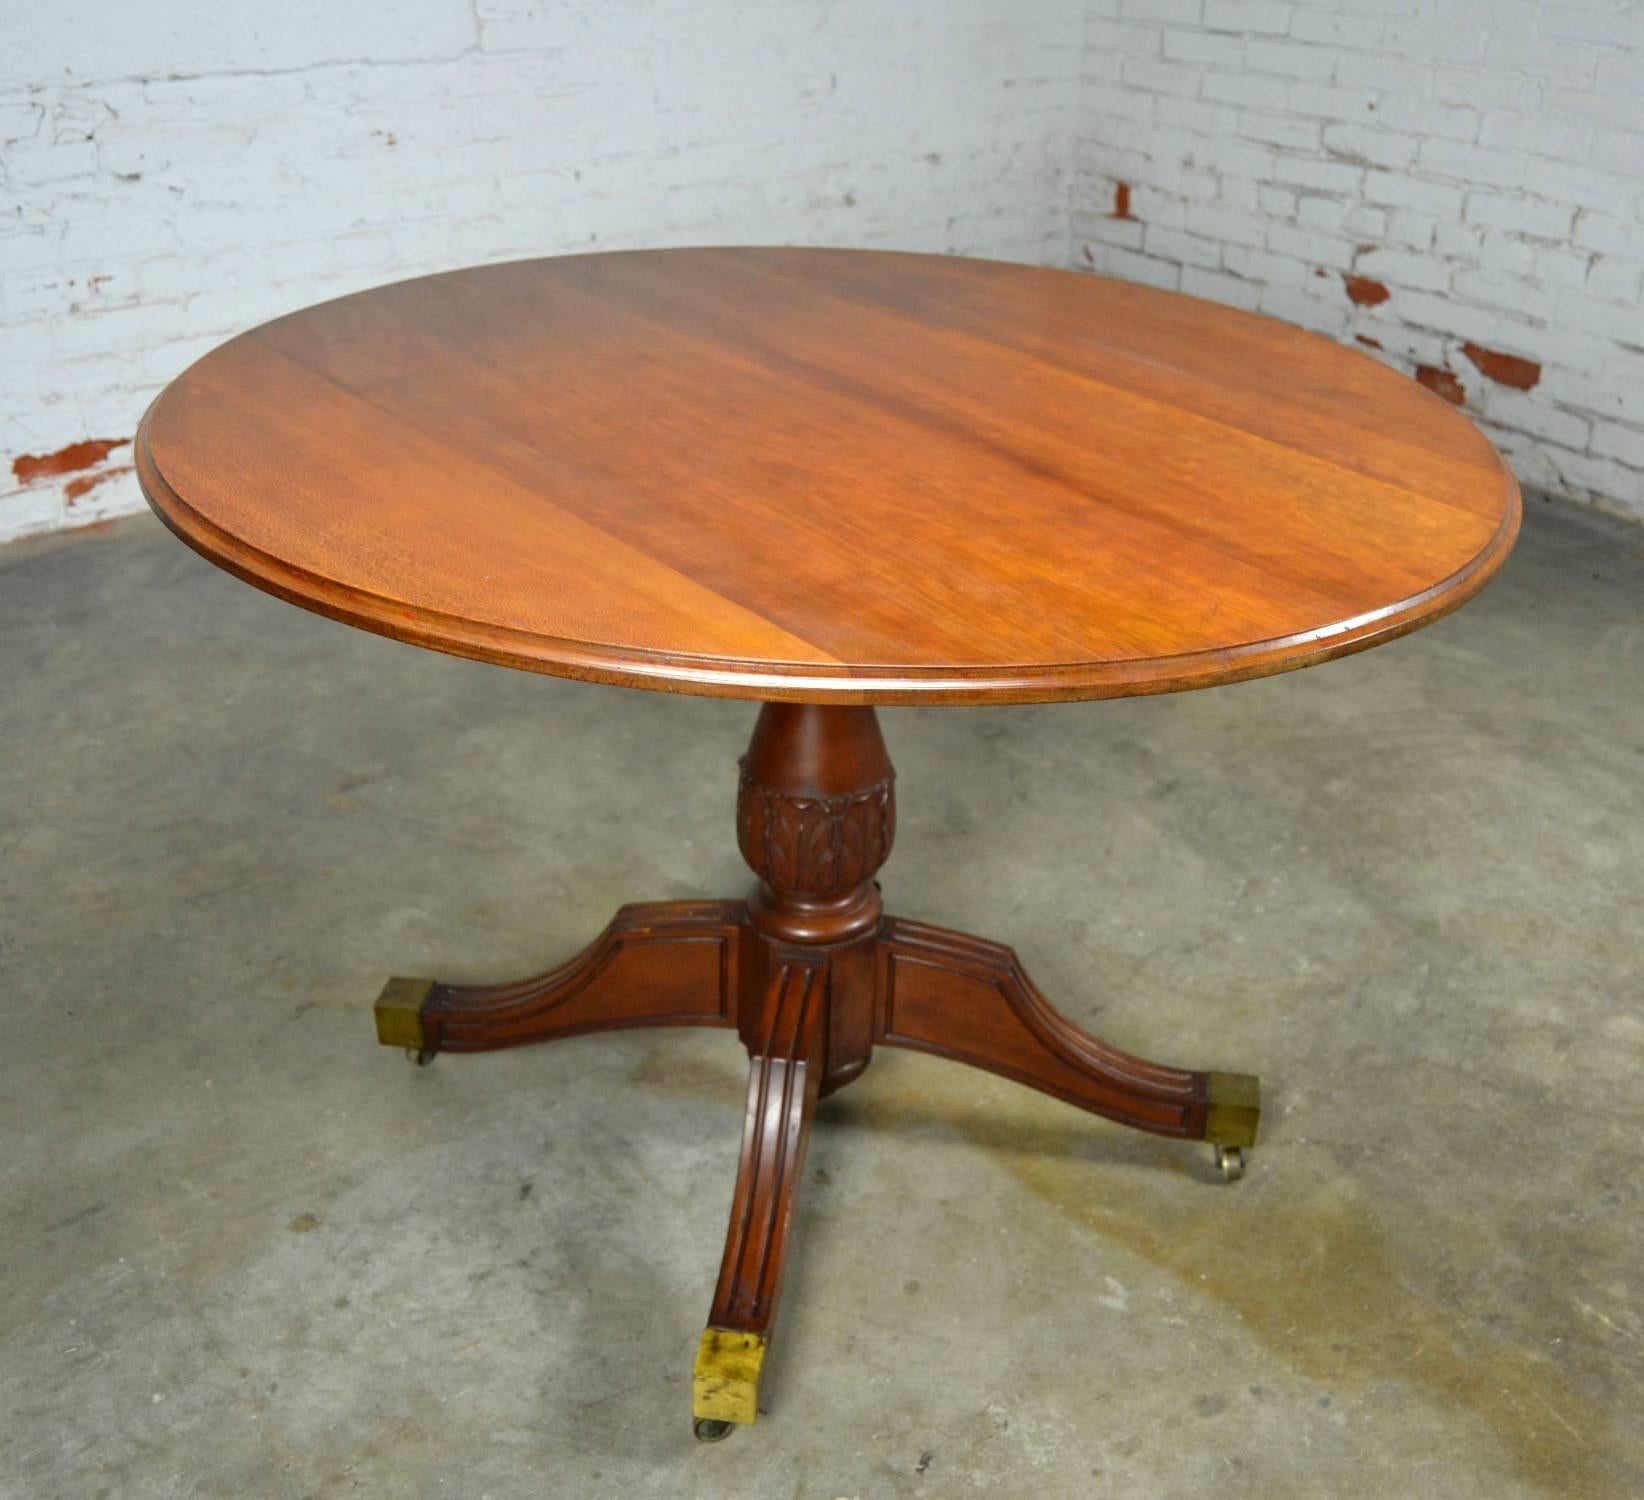 Beautiful classical Regency carved mahogany round tilt-top breakfast or center table with ogee top edge and acanthus leaves on pedestal base, circa 1844-1900 and in wonderful antique condition.

This gorgeous Georgian mahogany circular tilt-top